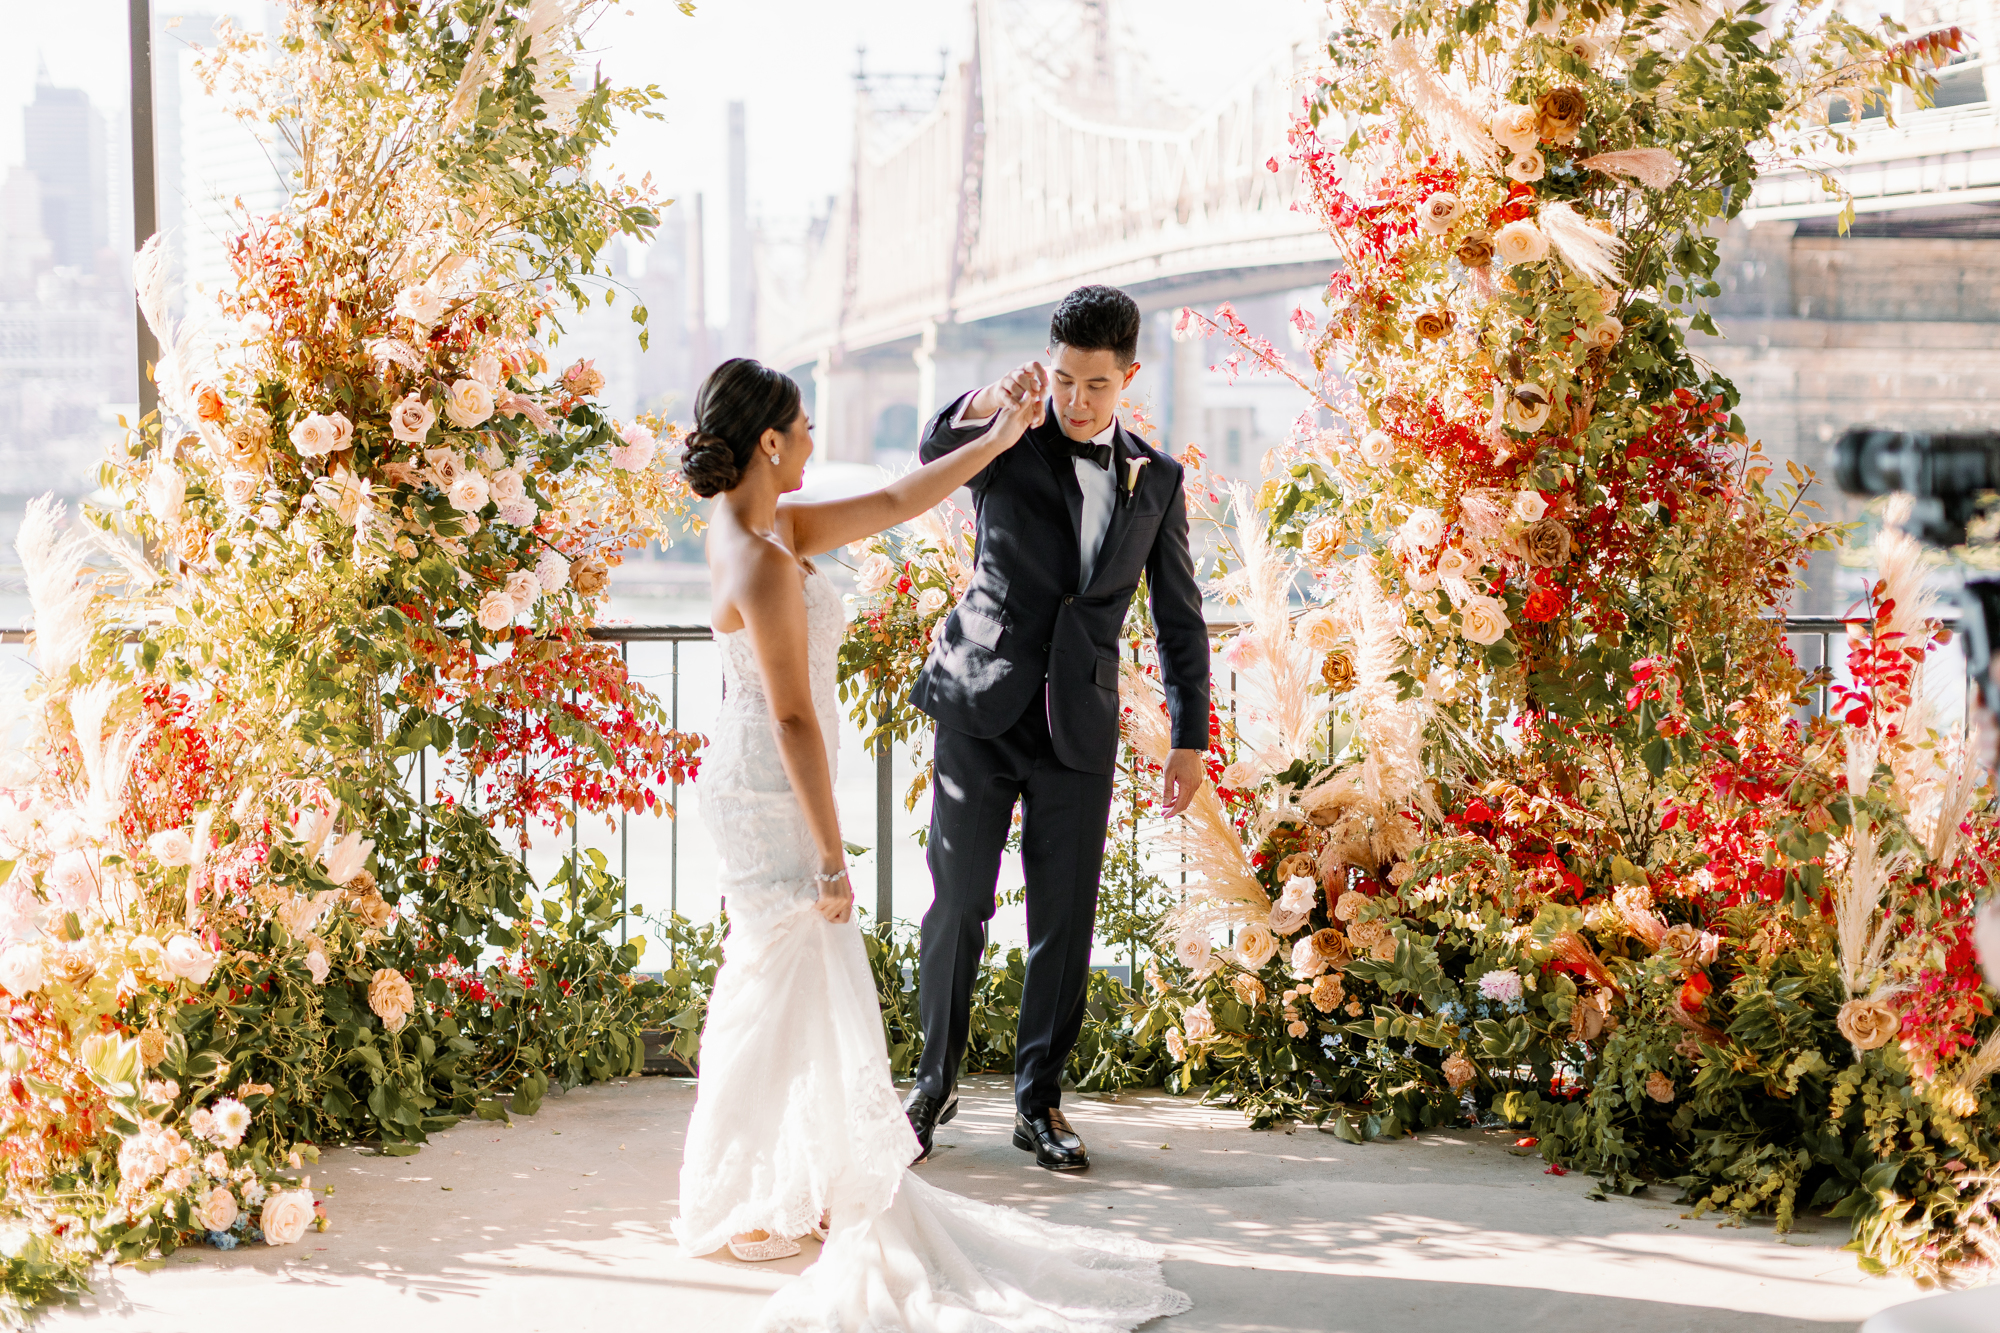 Ravel Hotel wedding with stunning floral decor on the rooftop